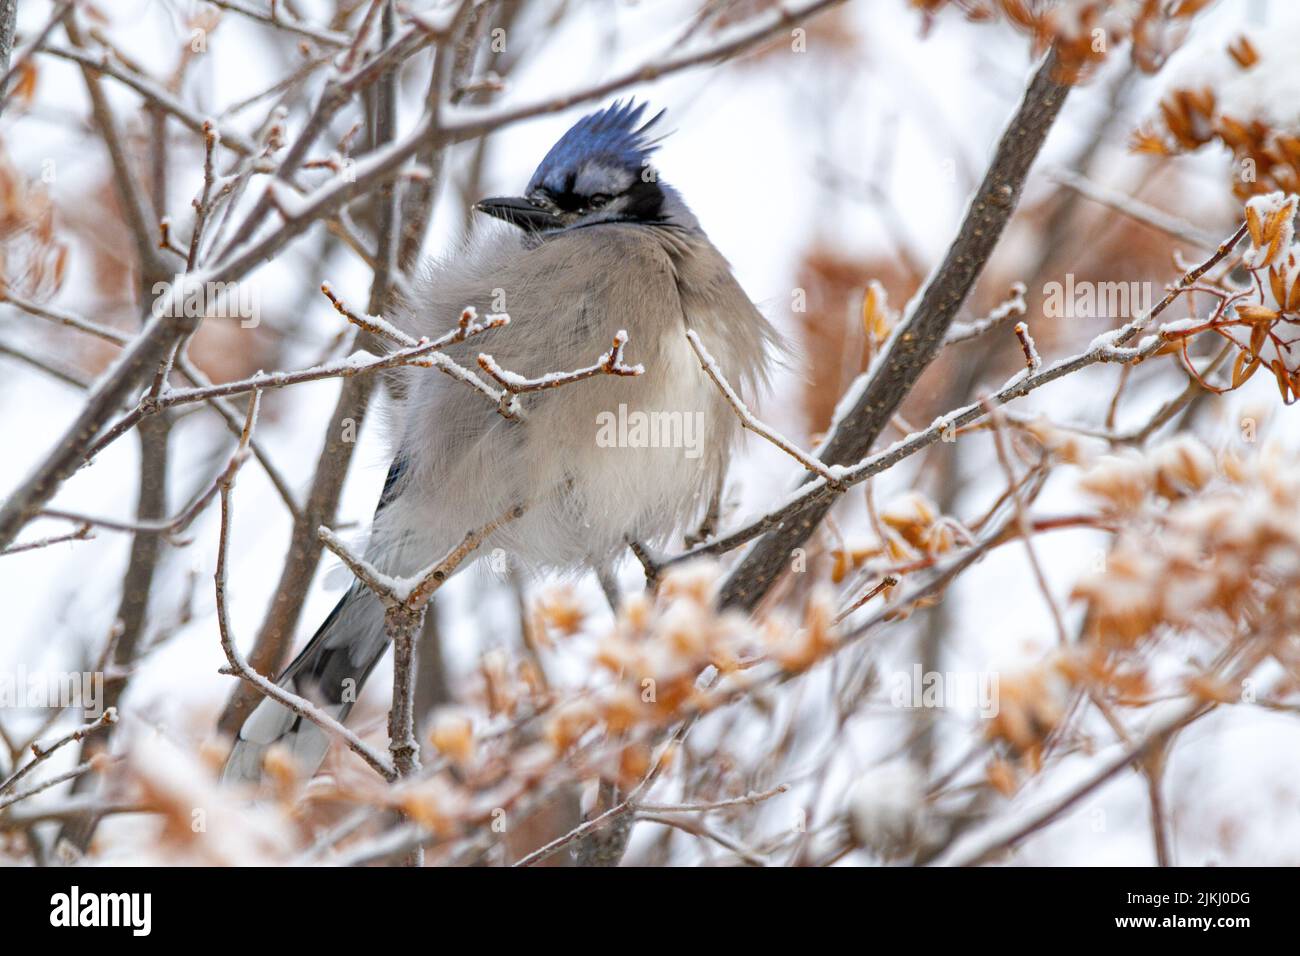 A closeup shot of a Puffed Up Blue Jay on a tree branch Stock Photo